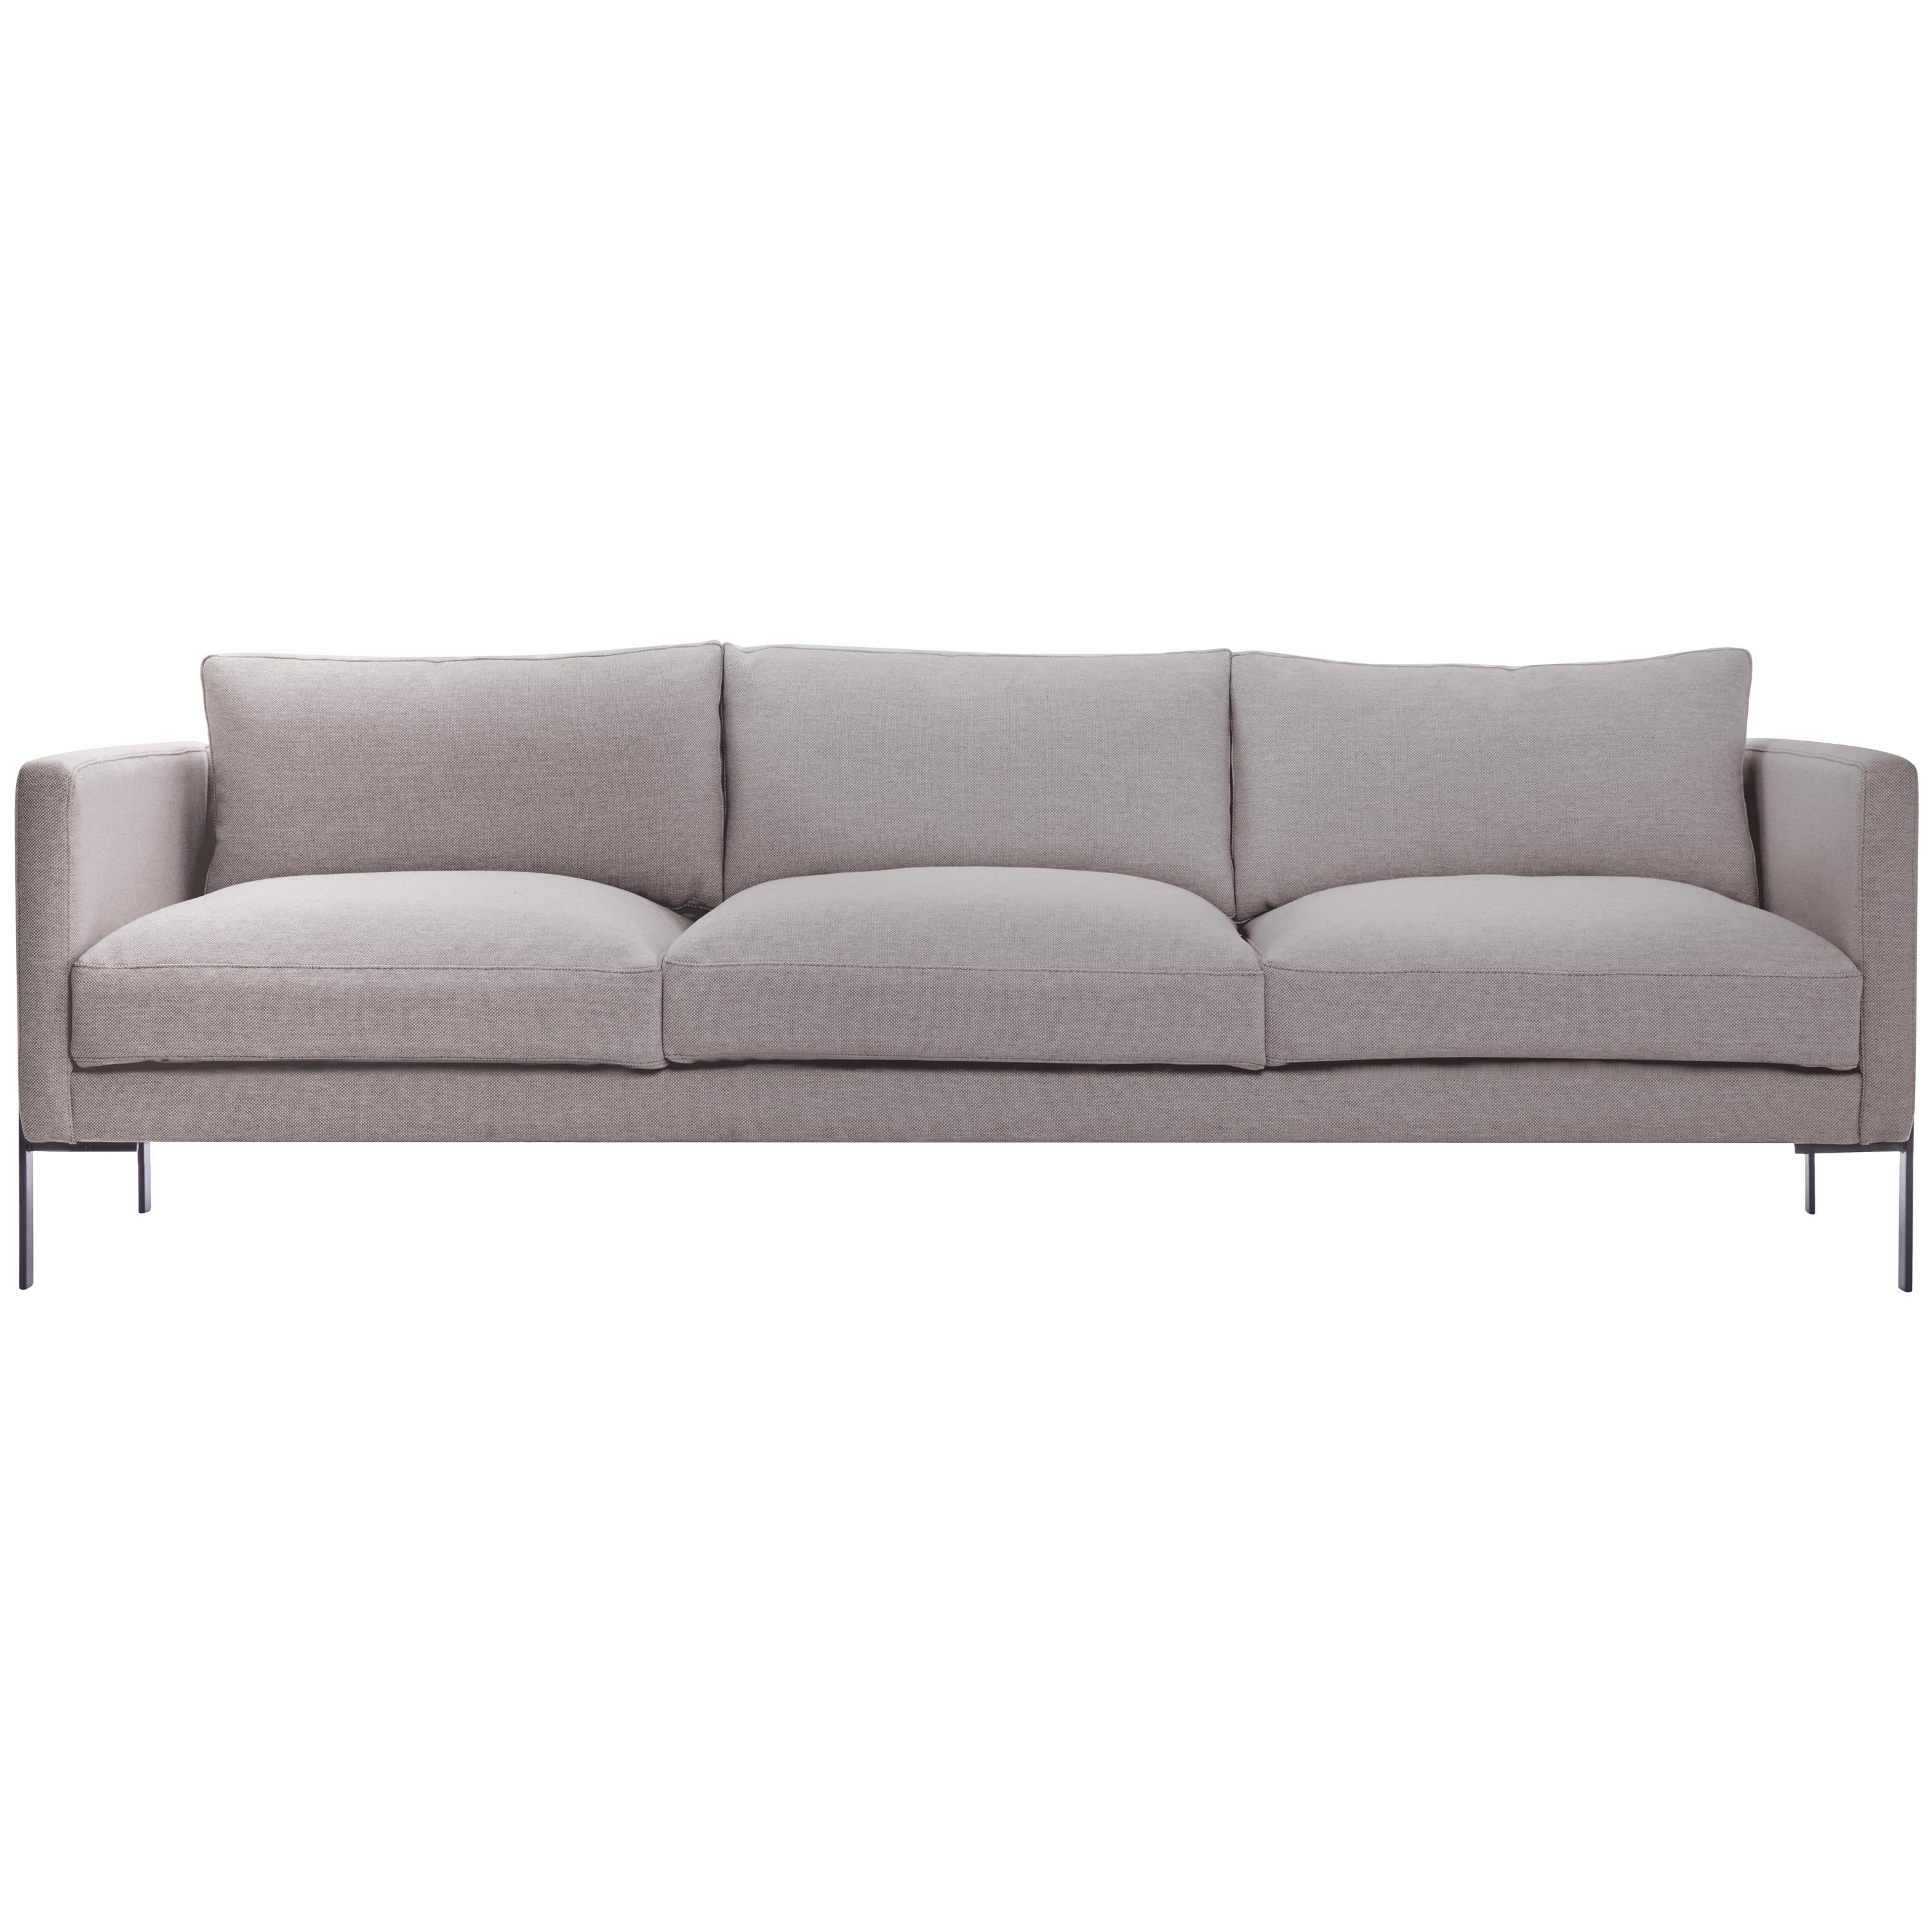 Truss Sofa in Maharam Ash Fabric and Powder-Coated Steel by TRNK For Sale